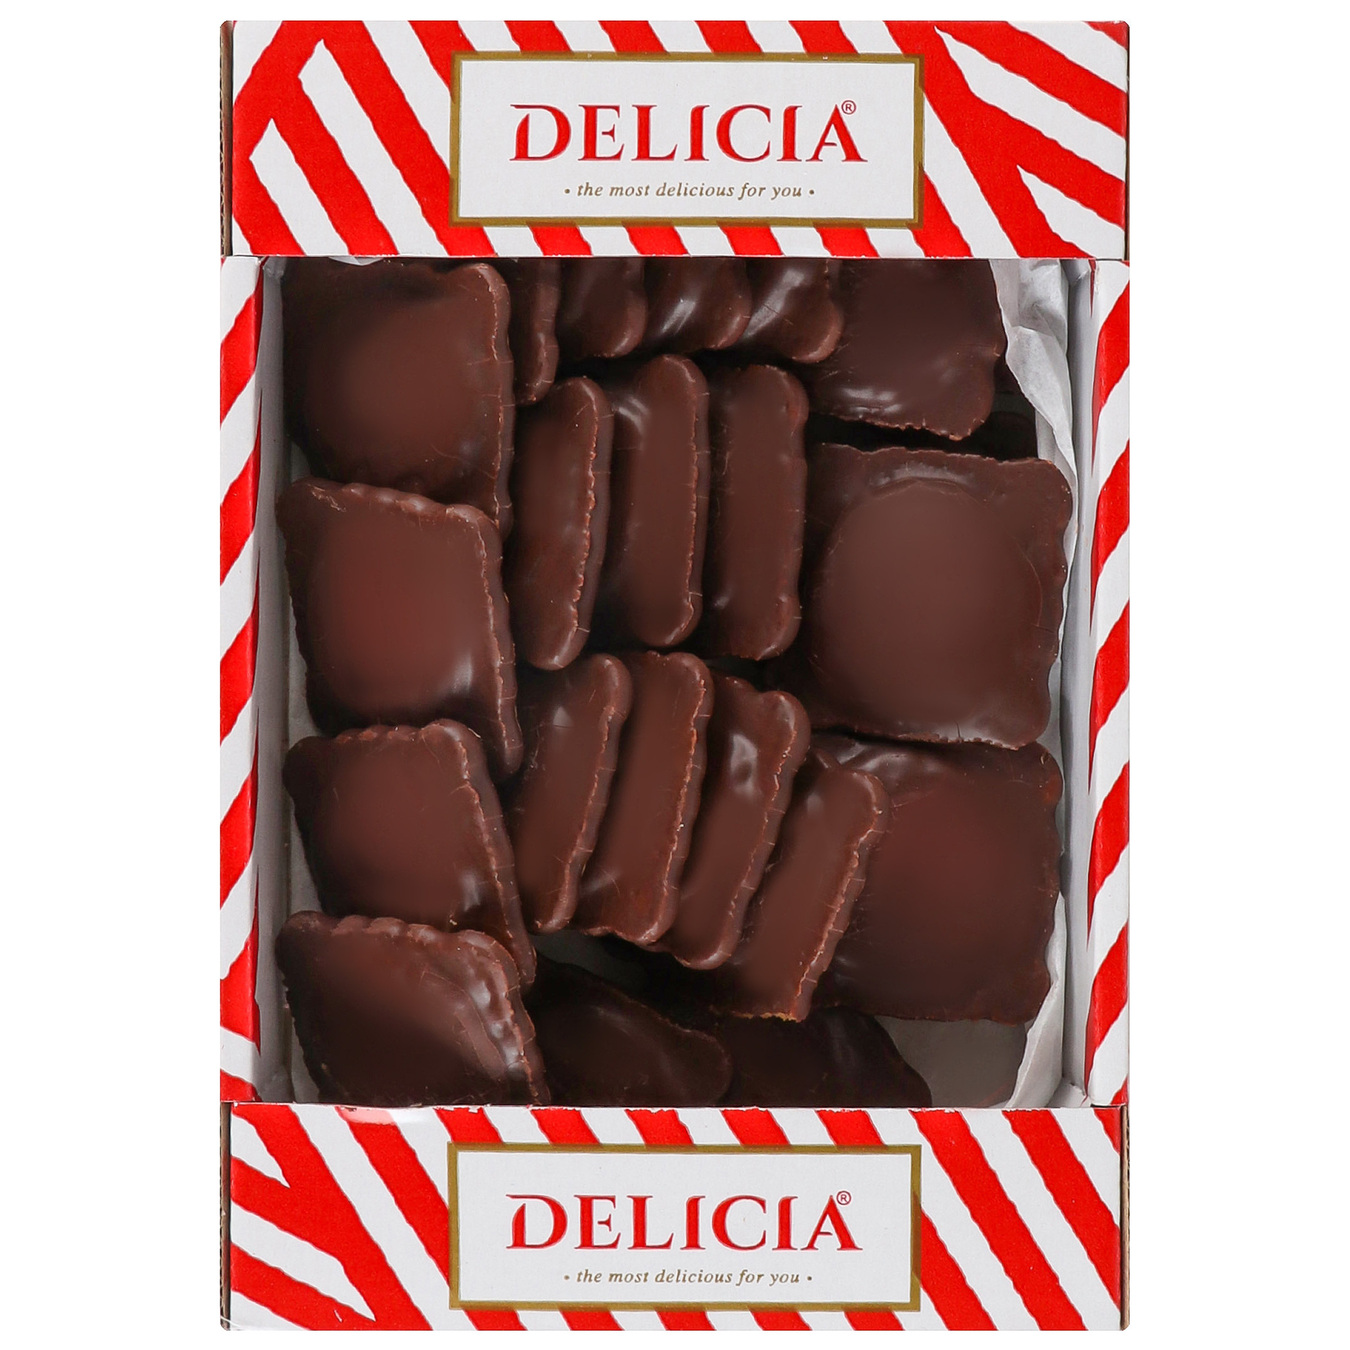 Cookies Delicia butter daisy raspberry flavor 350g